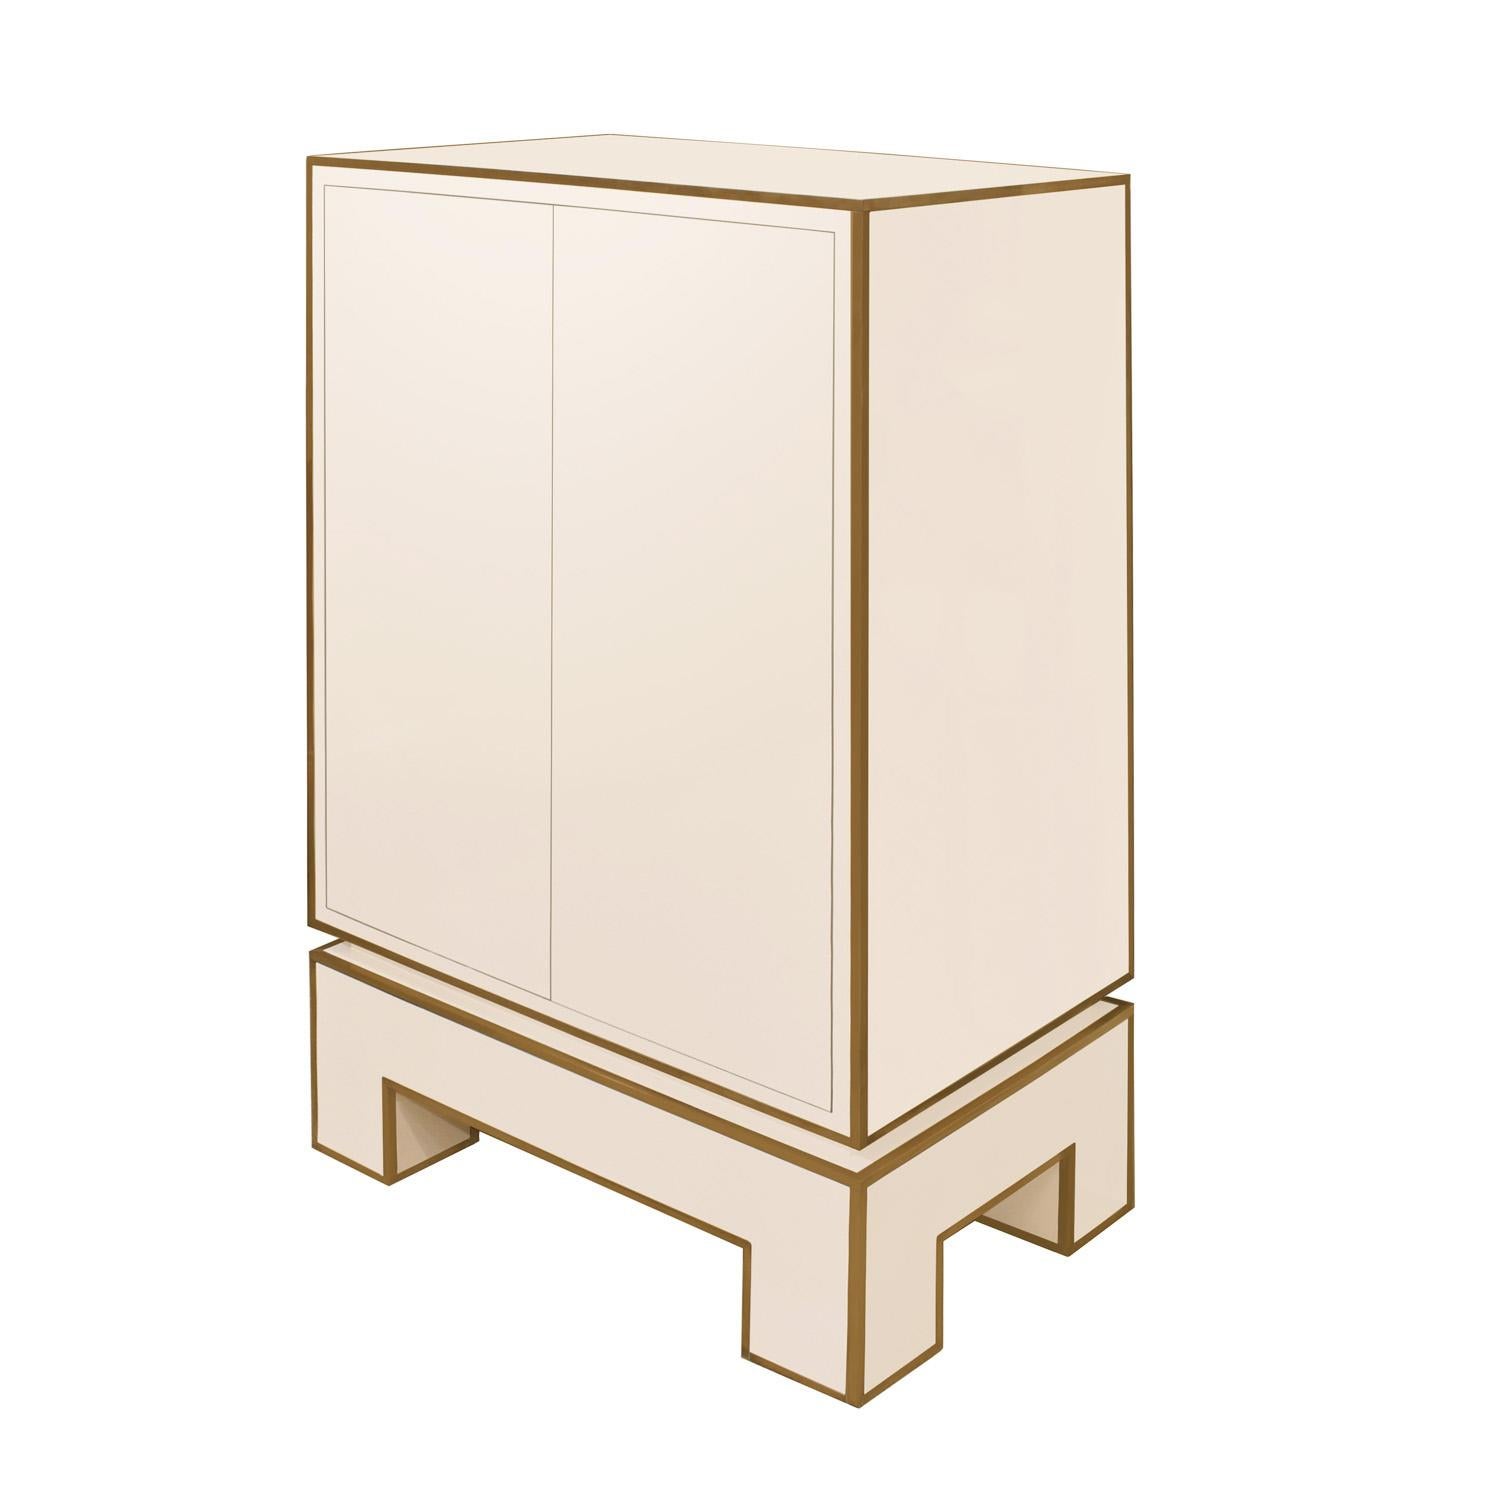 Chic 2 door cabinet in ivory lacquer with brass trim by Alain Delon for Maison Jansen, France 1975 (brass label with designer signature inside left door). This cabinet was part of a series by the designer shown at the 1975 Salone del Mobile in